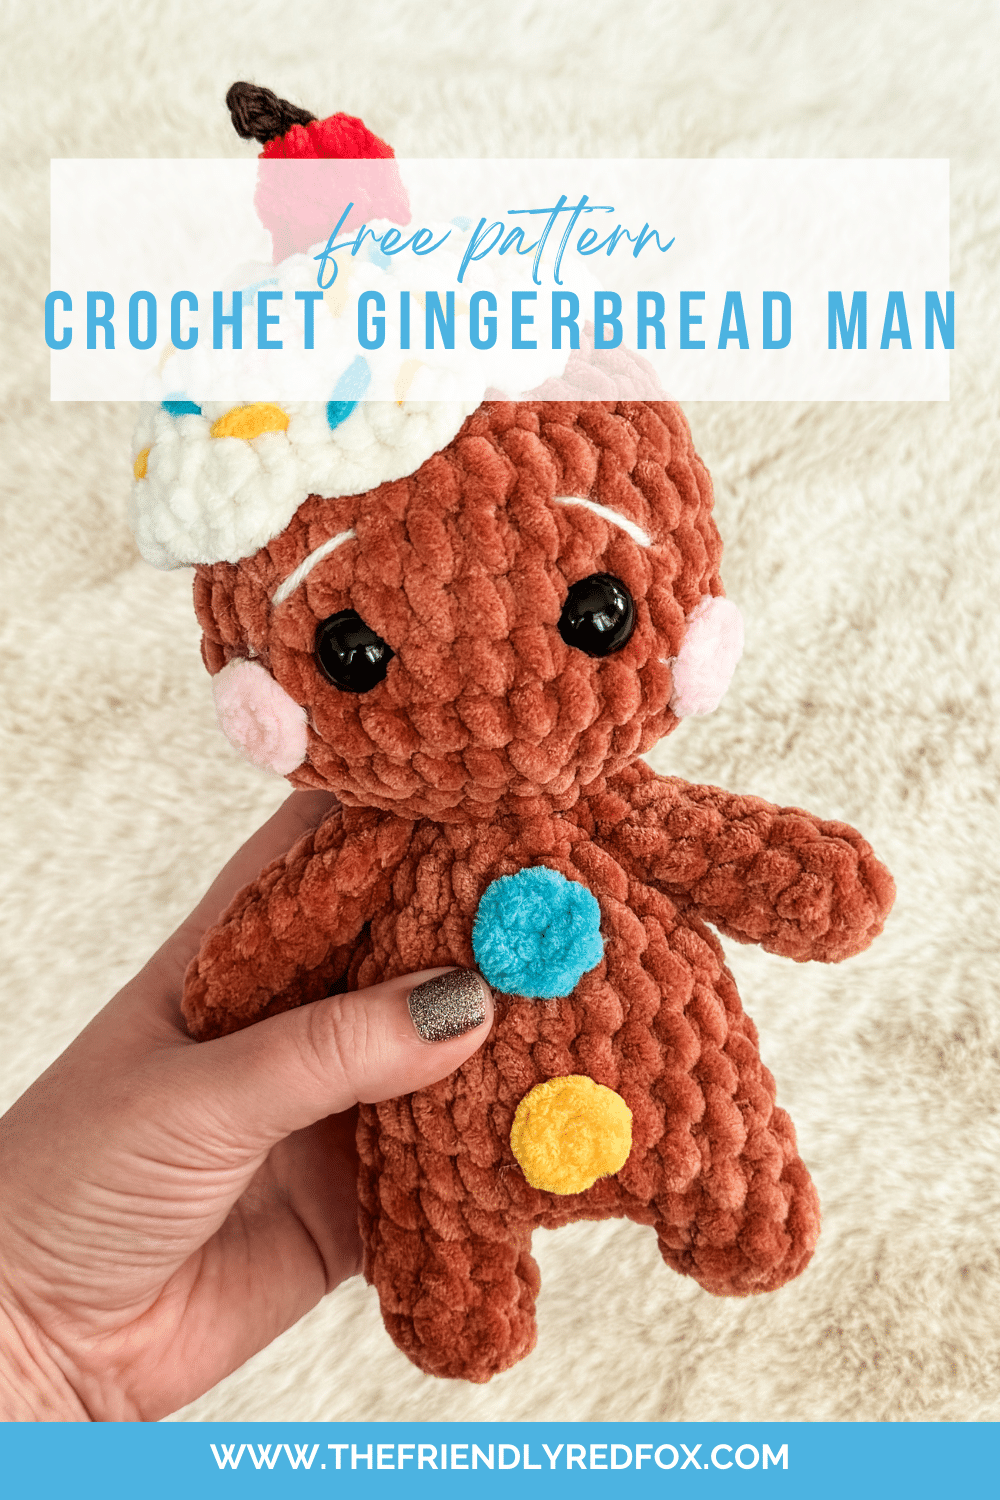 This Gingerbread Man Crochet Pattern is free, so you can make an entire family. Cute as a candy button and a perfect Holiday amigurumi pattern.